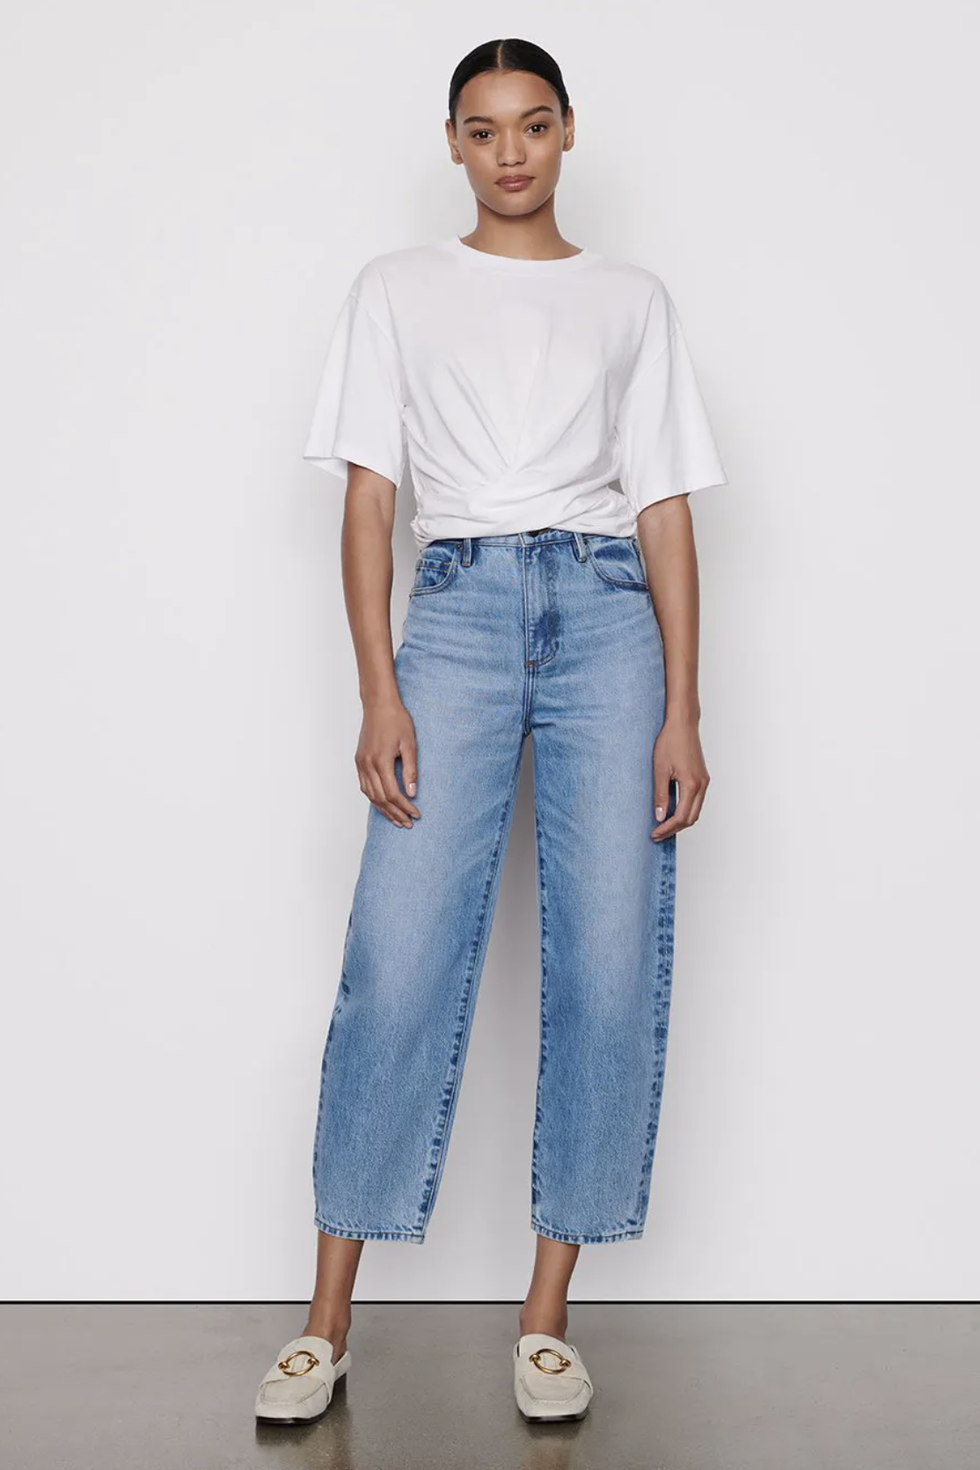 The 11 Best Sustainable Denim Brands to Know (and Shop)